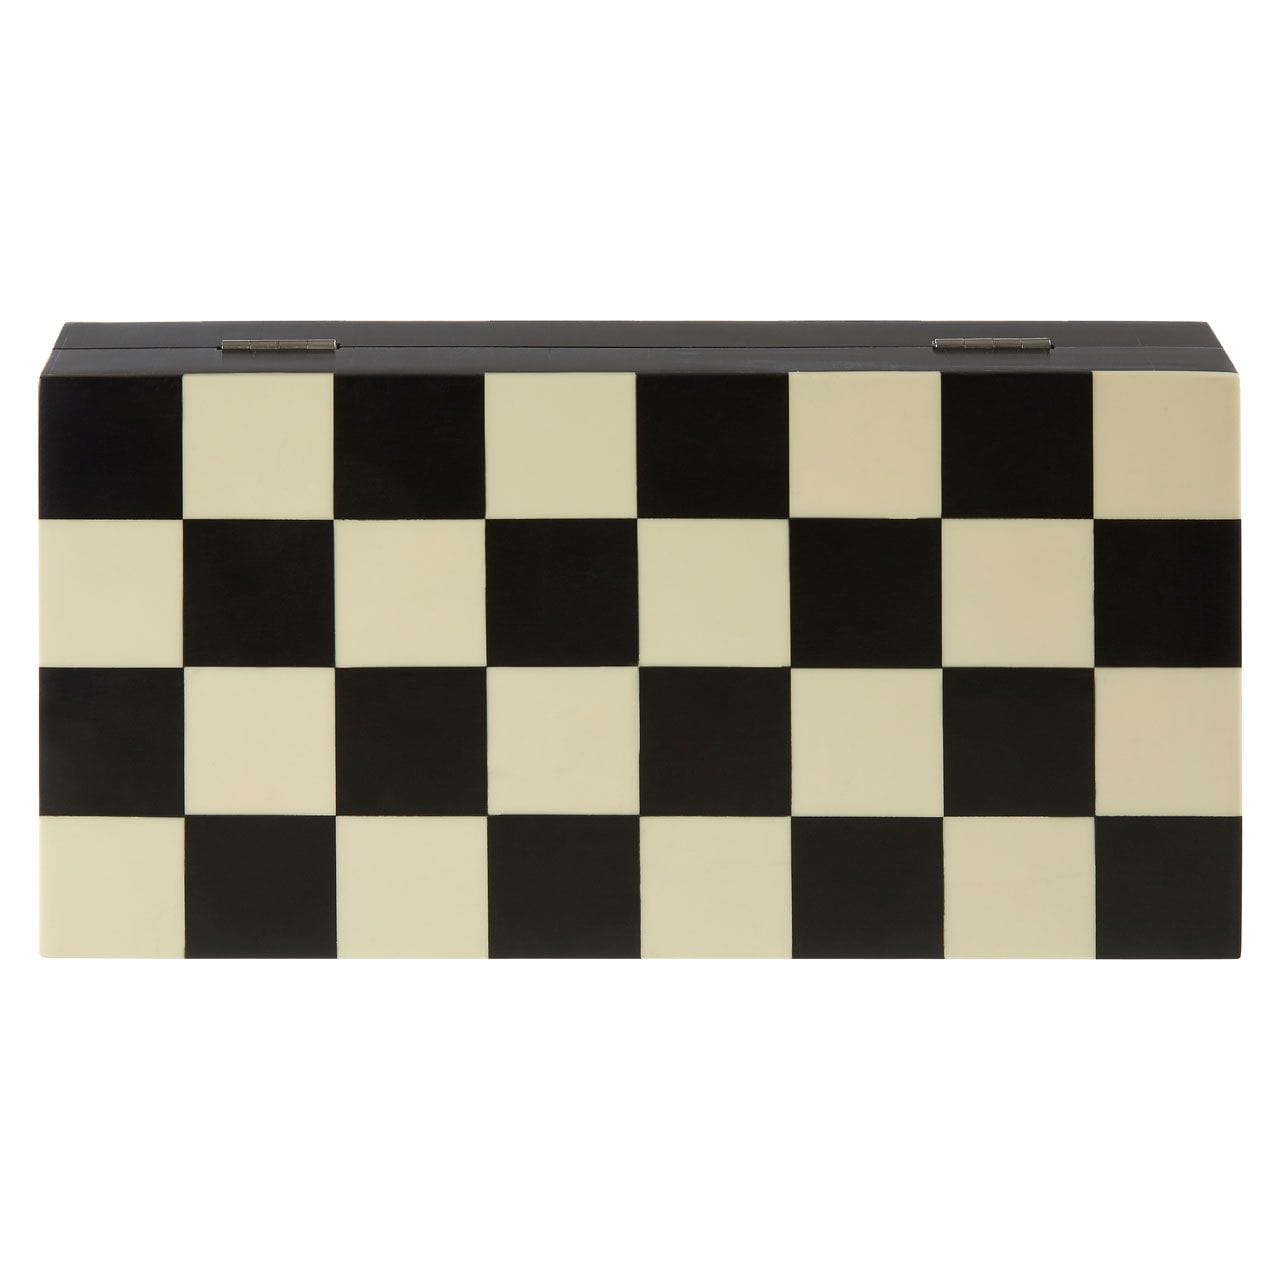 Noosa & Co. Accessories Chamberlain Games Black / White Chess Set House of Isabella UK